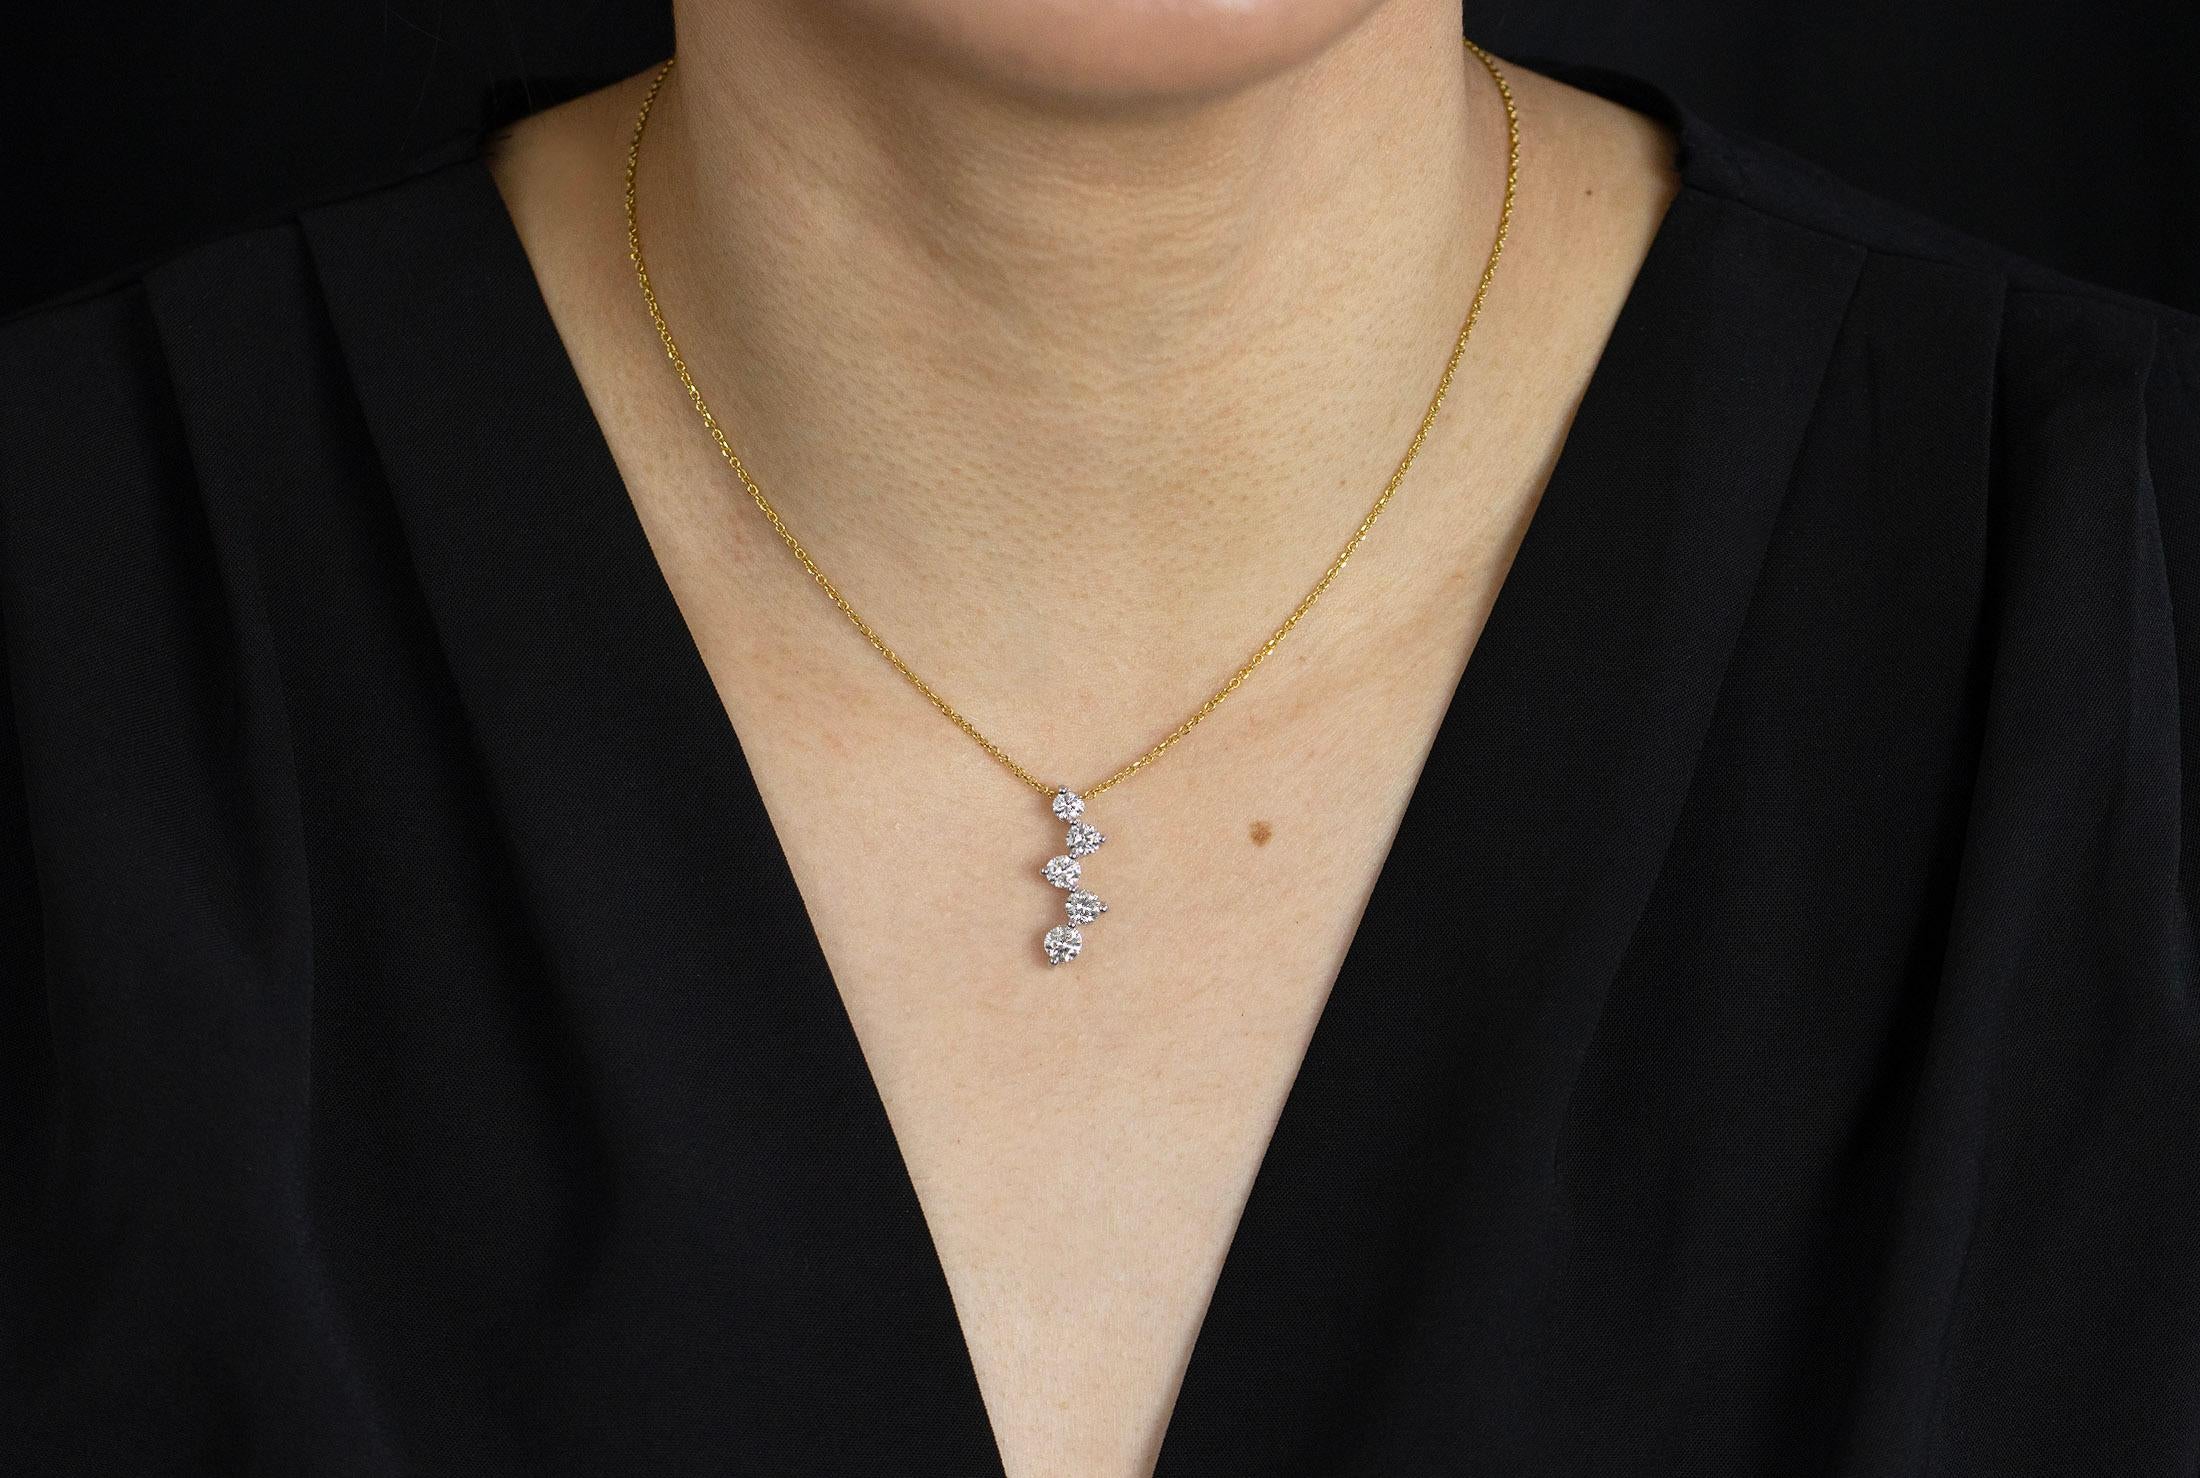 A simple pendant necklace showcasing five graduating round diamonds, set in a constellation style drop in 14k white gold. Diamonds weigh 1.54 carats total. Suspended on a 16 inches adjustable yellow gold chain.

Style available in different price